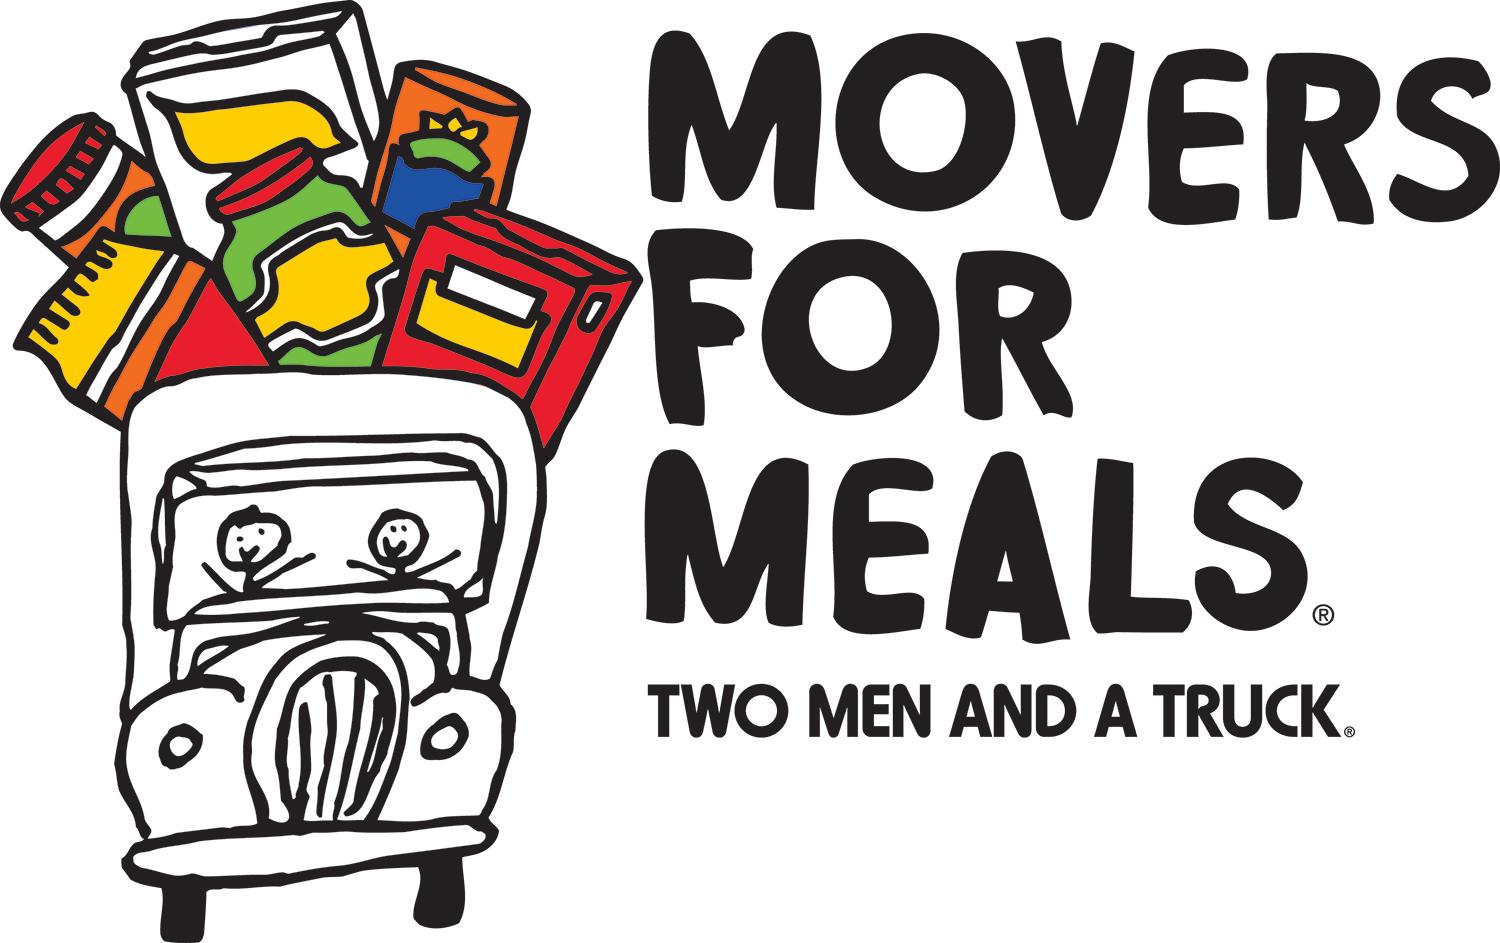 Movers for Meals - food drive